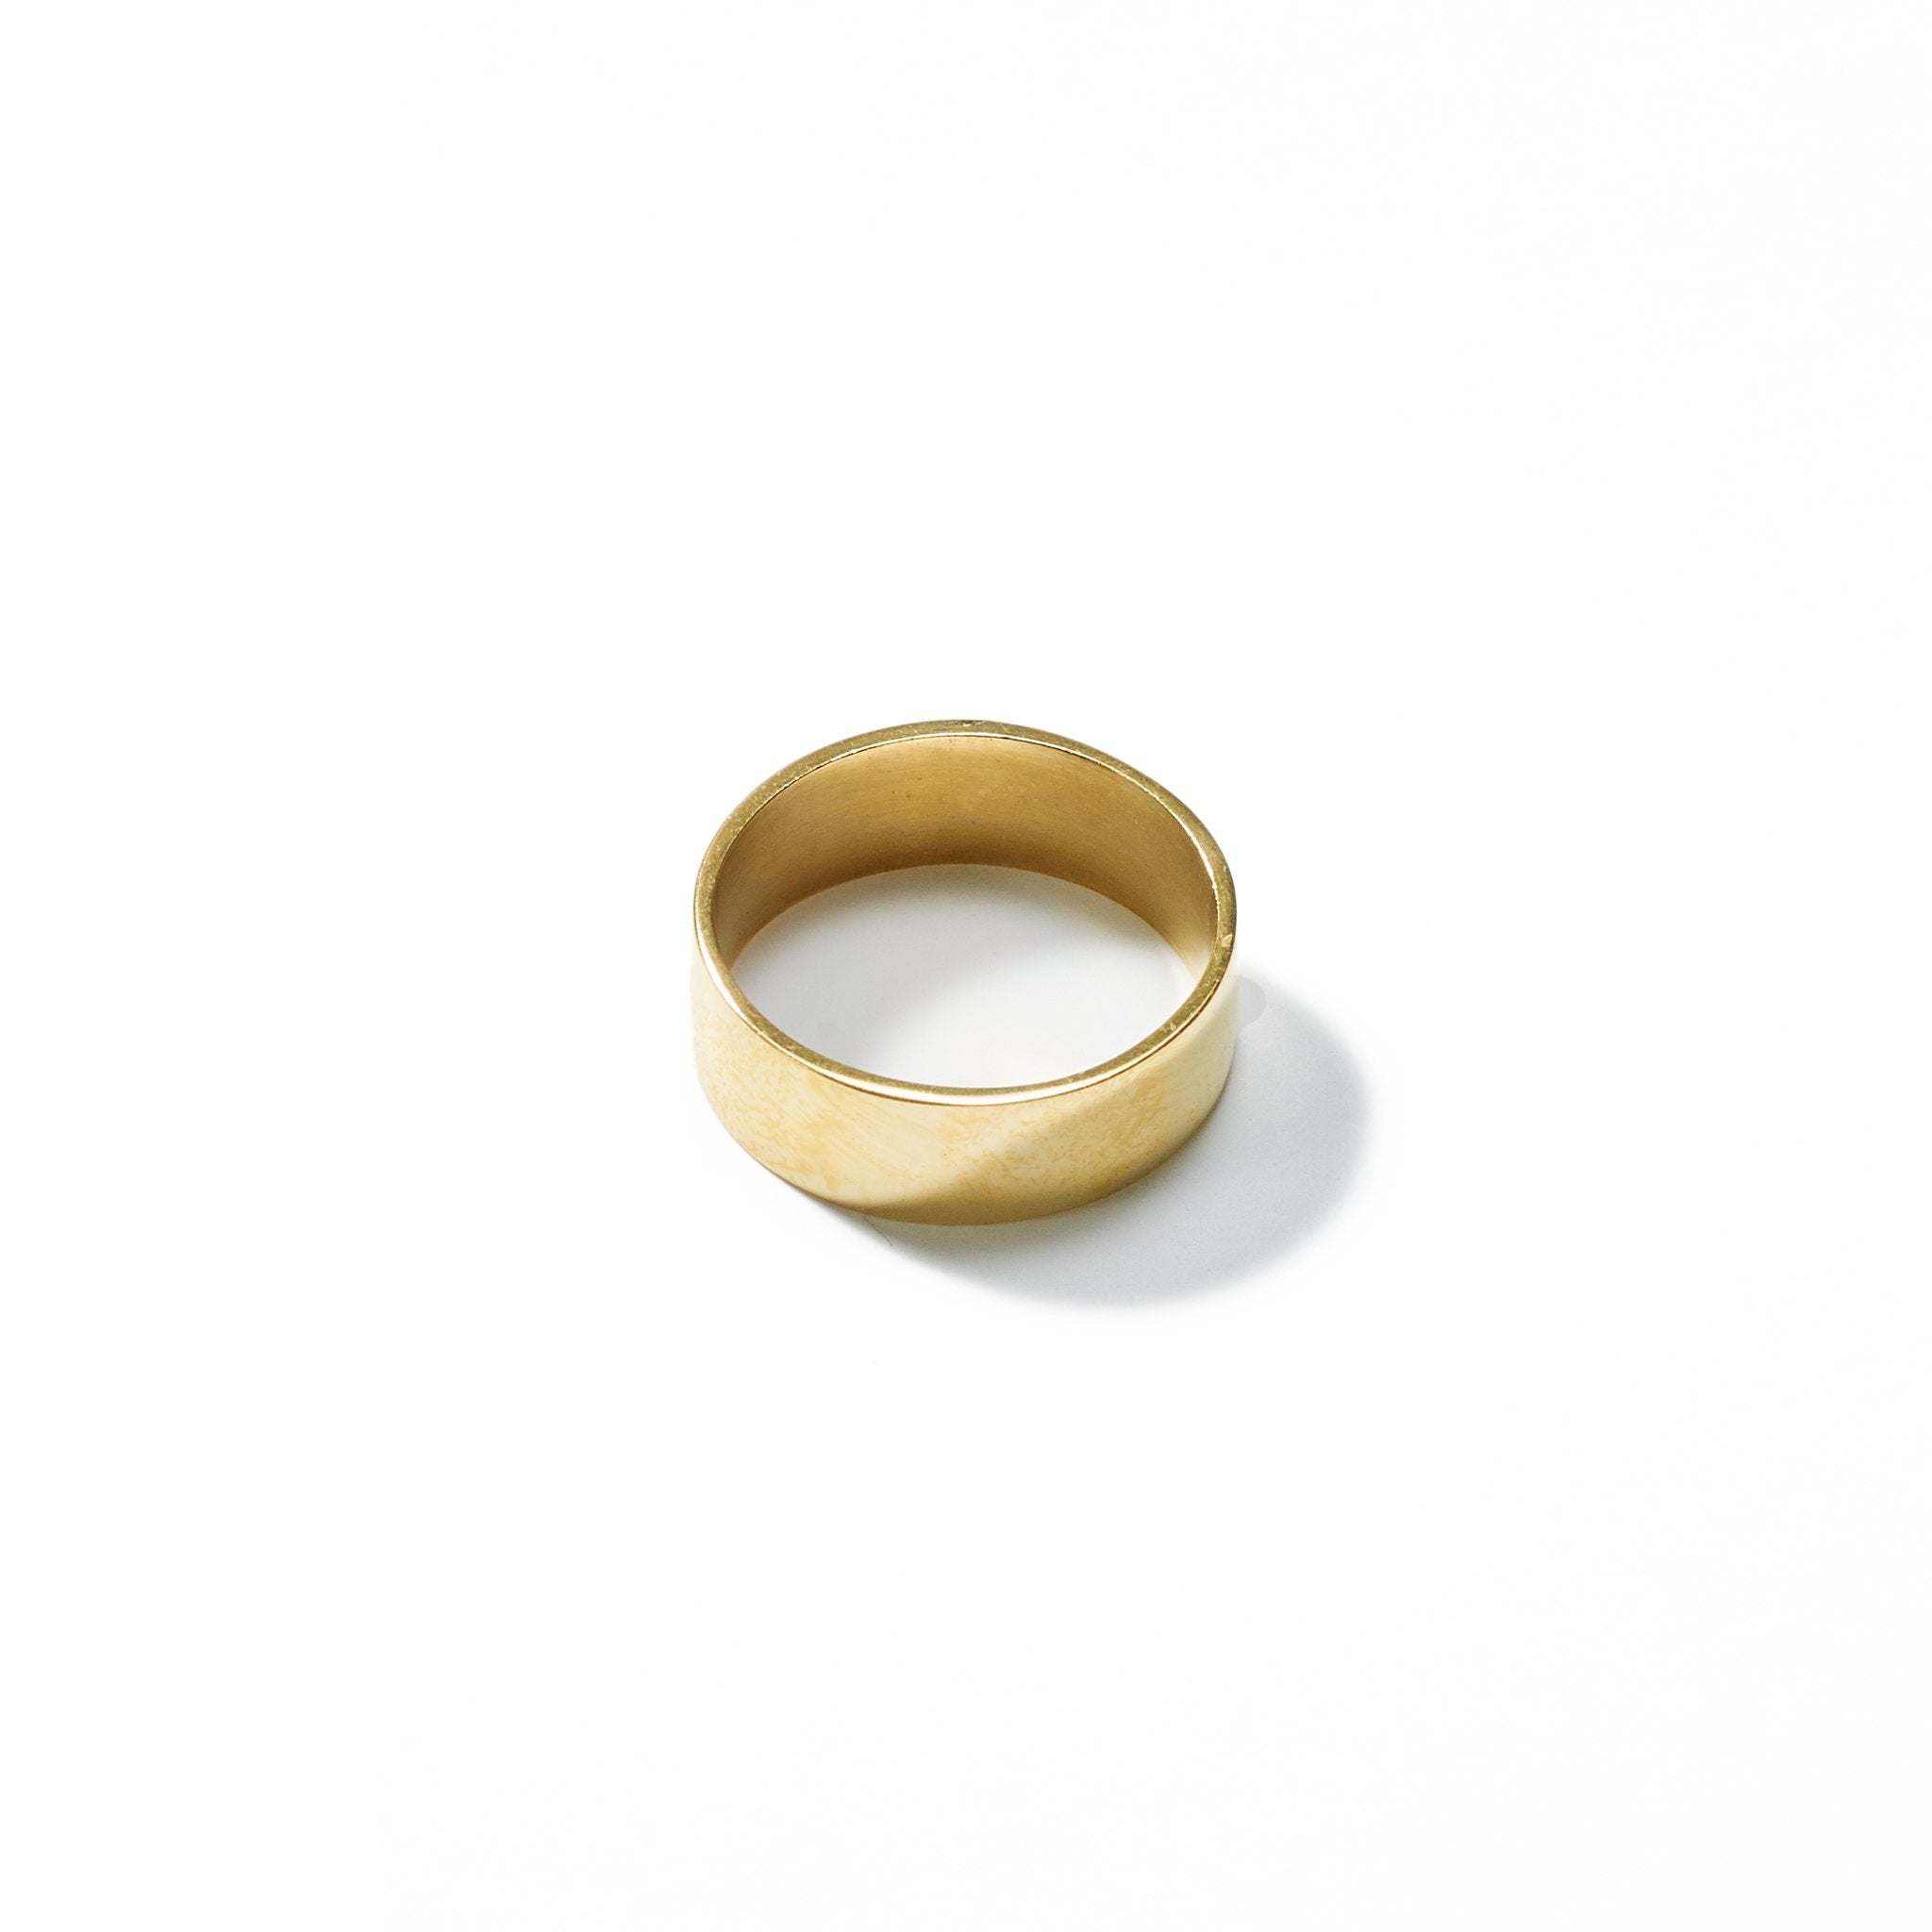 A classic and understated size 5.5 ring, of medium width, handcrafted from upcycled brass.Perfect for stacking or beautiful alone.